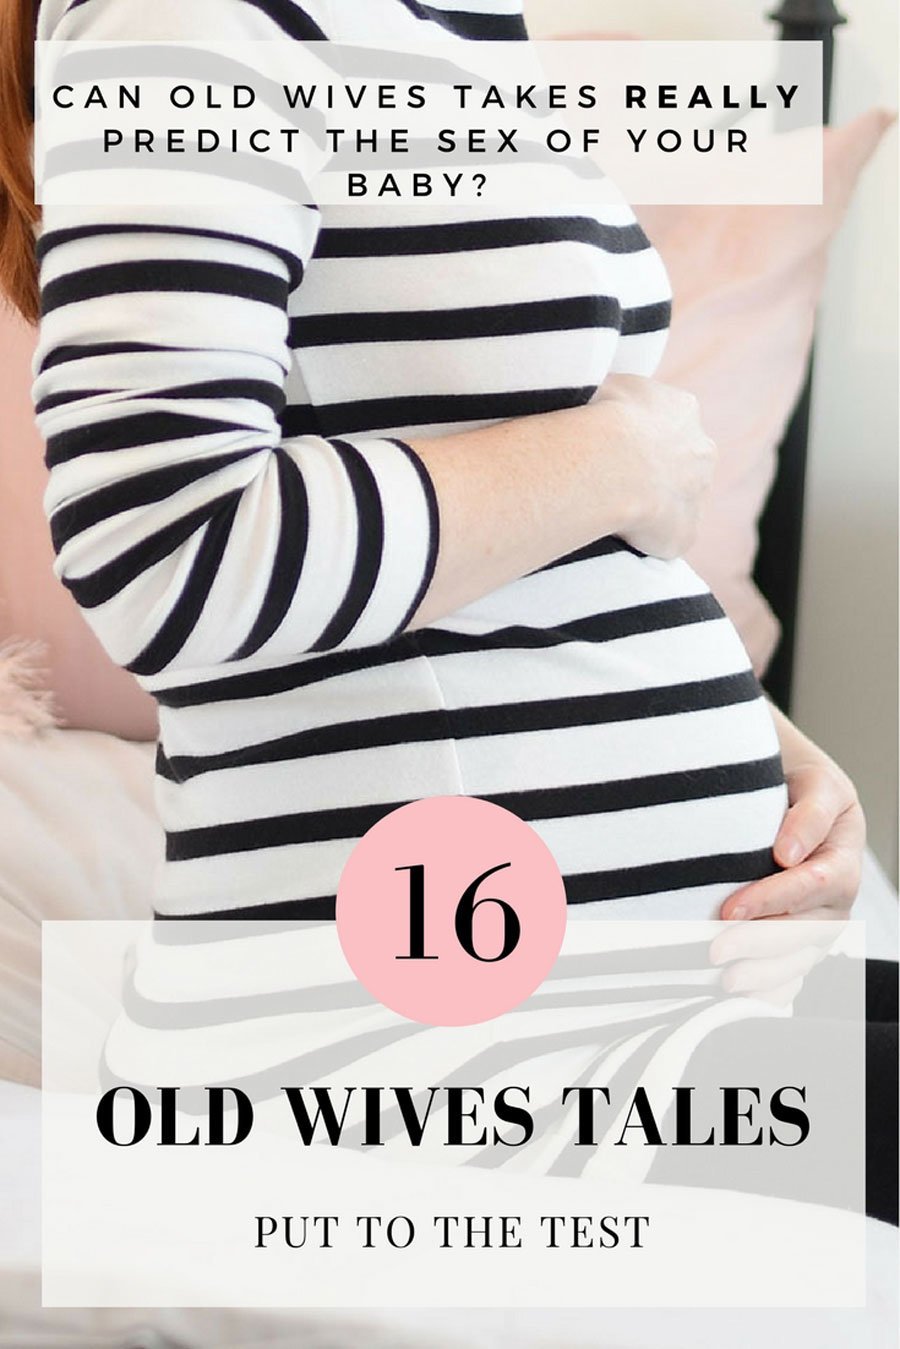 old wives tales about babies sex